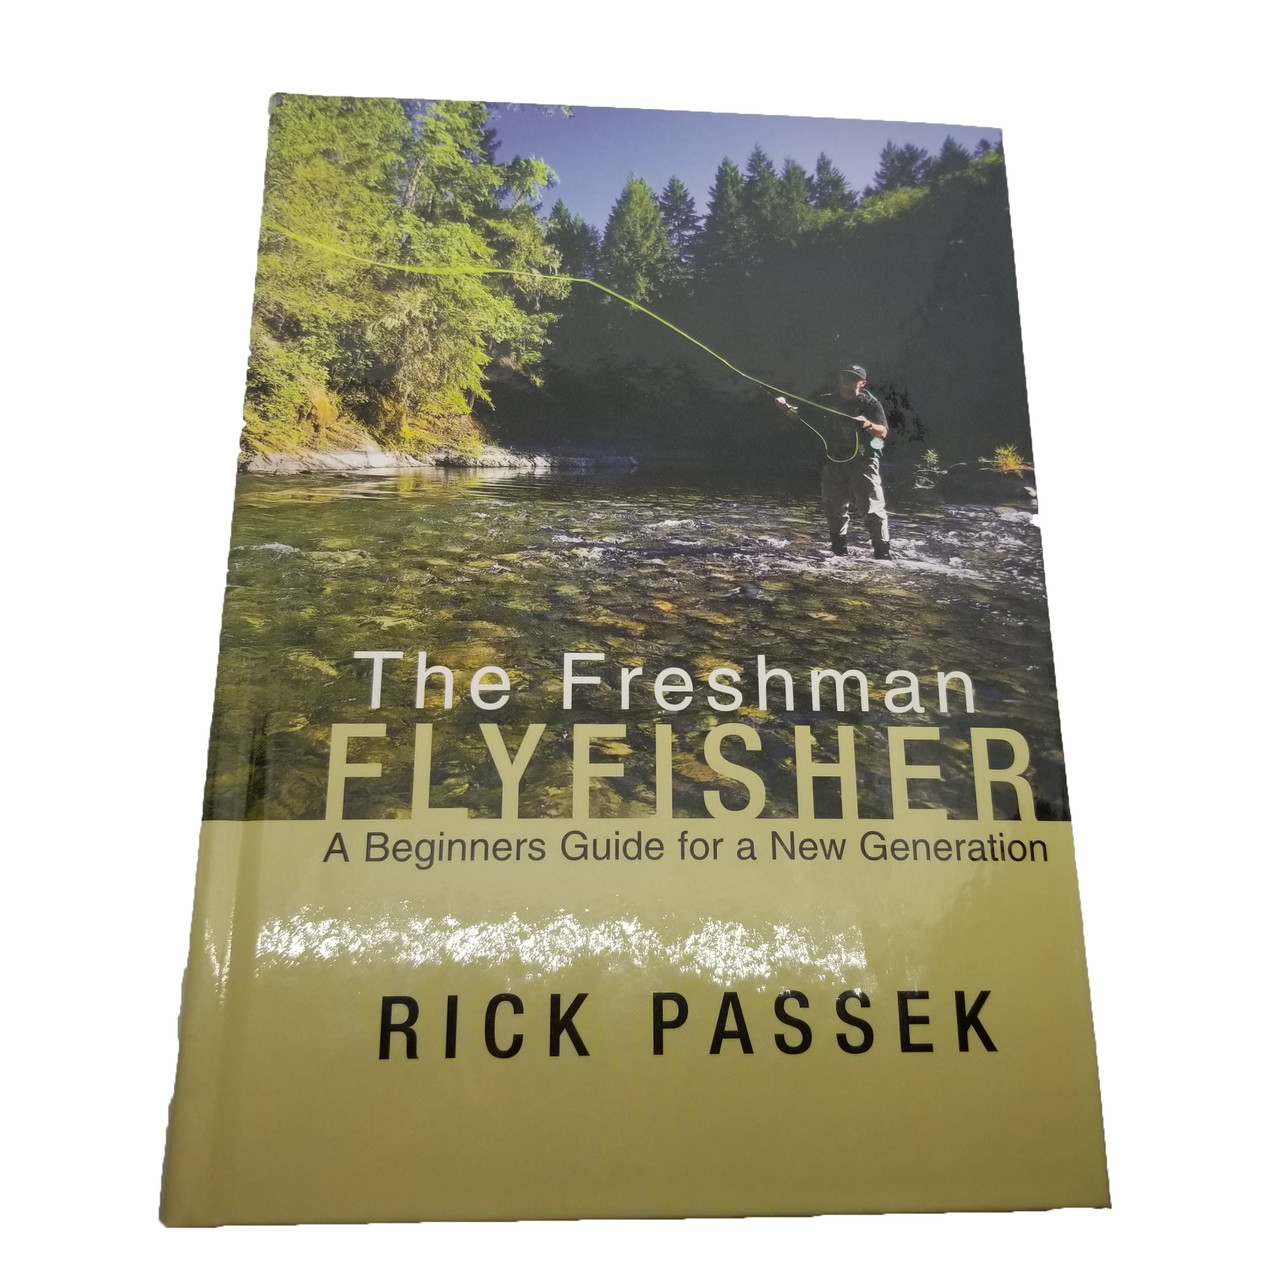 The Freshman FlyFisher: A Beginner’s Guide For a New Generation

New to fly fishing? Don’t know who to ask or what to buy? Here you’ll find no-nonsense advice for the beginner flyfisher. Included are sections on rods, reels, flies, watercraft, accessories, entomology… along with a section on techniques to use when fishing the lakes and rivers of BC, Alberta and the Pacific Northwest. A great all-around reference to keep with you each time you head out to fish. 


About the Author
In 2008, Rick Passek released The Freshman FlyFisher- A Beginner’s Guide for a New Generation, which introduced new FlyFishers to the rewards of an ancient sport with a modern twist. Rick is a popular speaker, media personality, and instructor, and the owner of Rp3 FlyFishing School based in the area of Vancouver Canada. His well-known blog can be found at FlyFishFanatic.ca